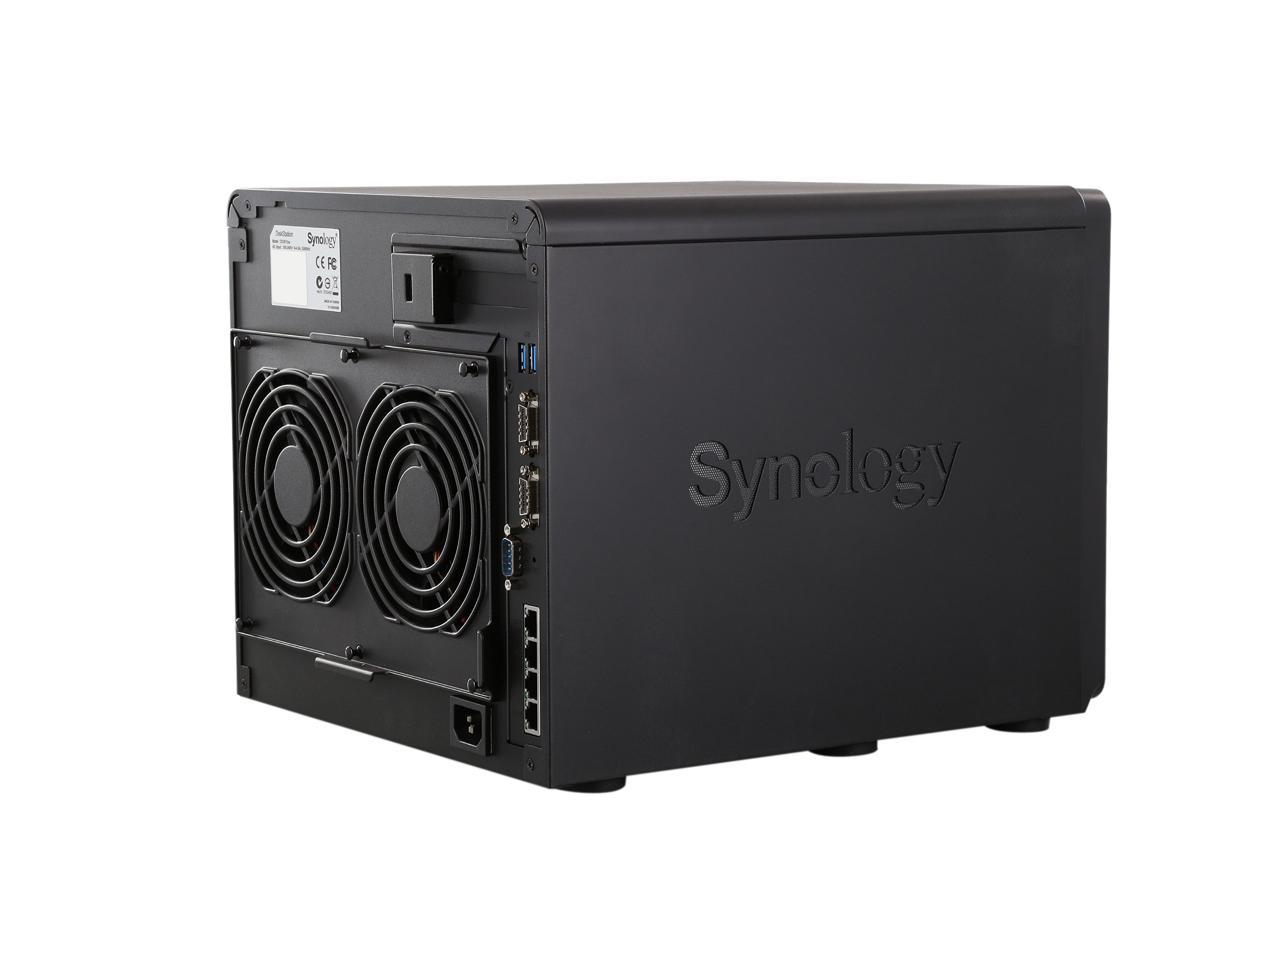 teamviewer ds3615xs synology download